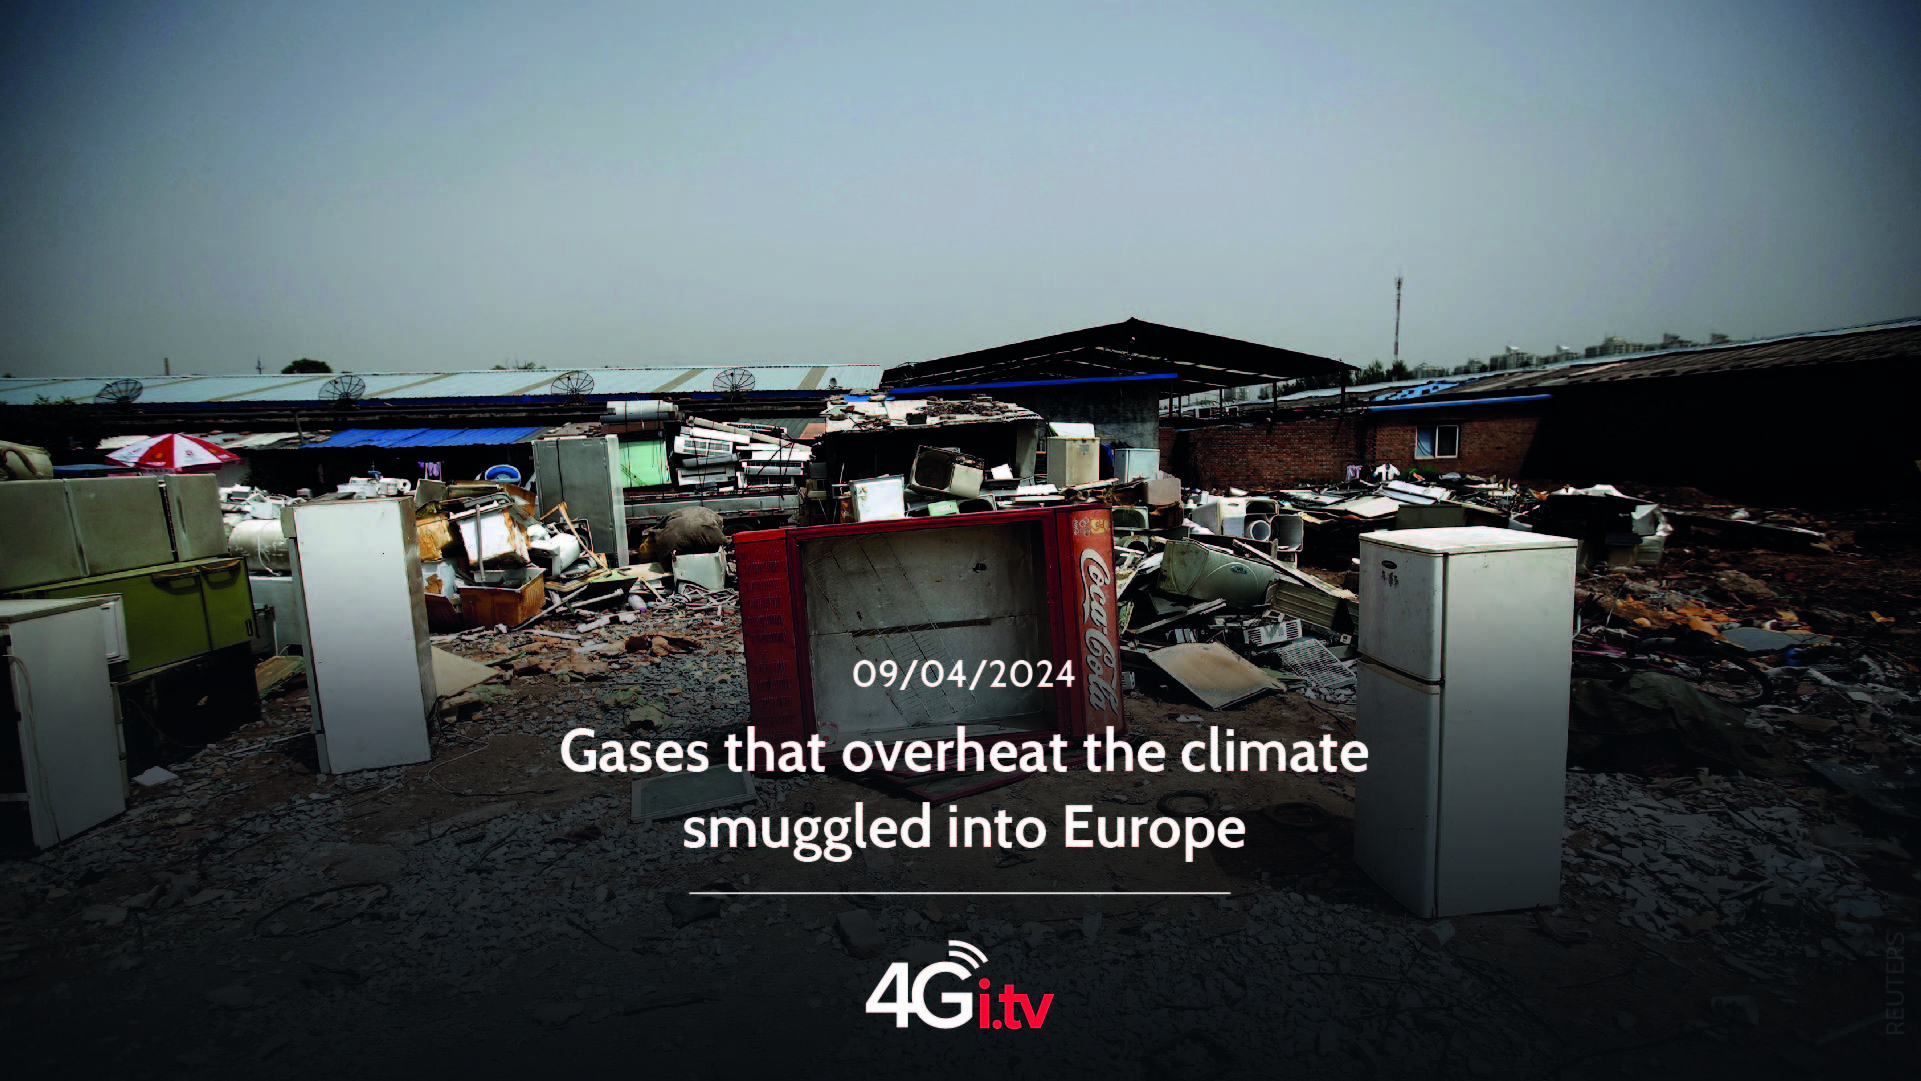 Подробнее о статье Gases that overheat the climate smuggled into Europe 